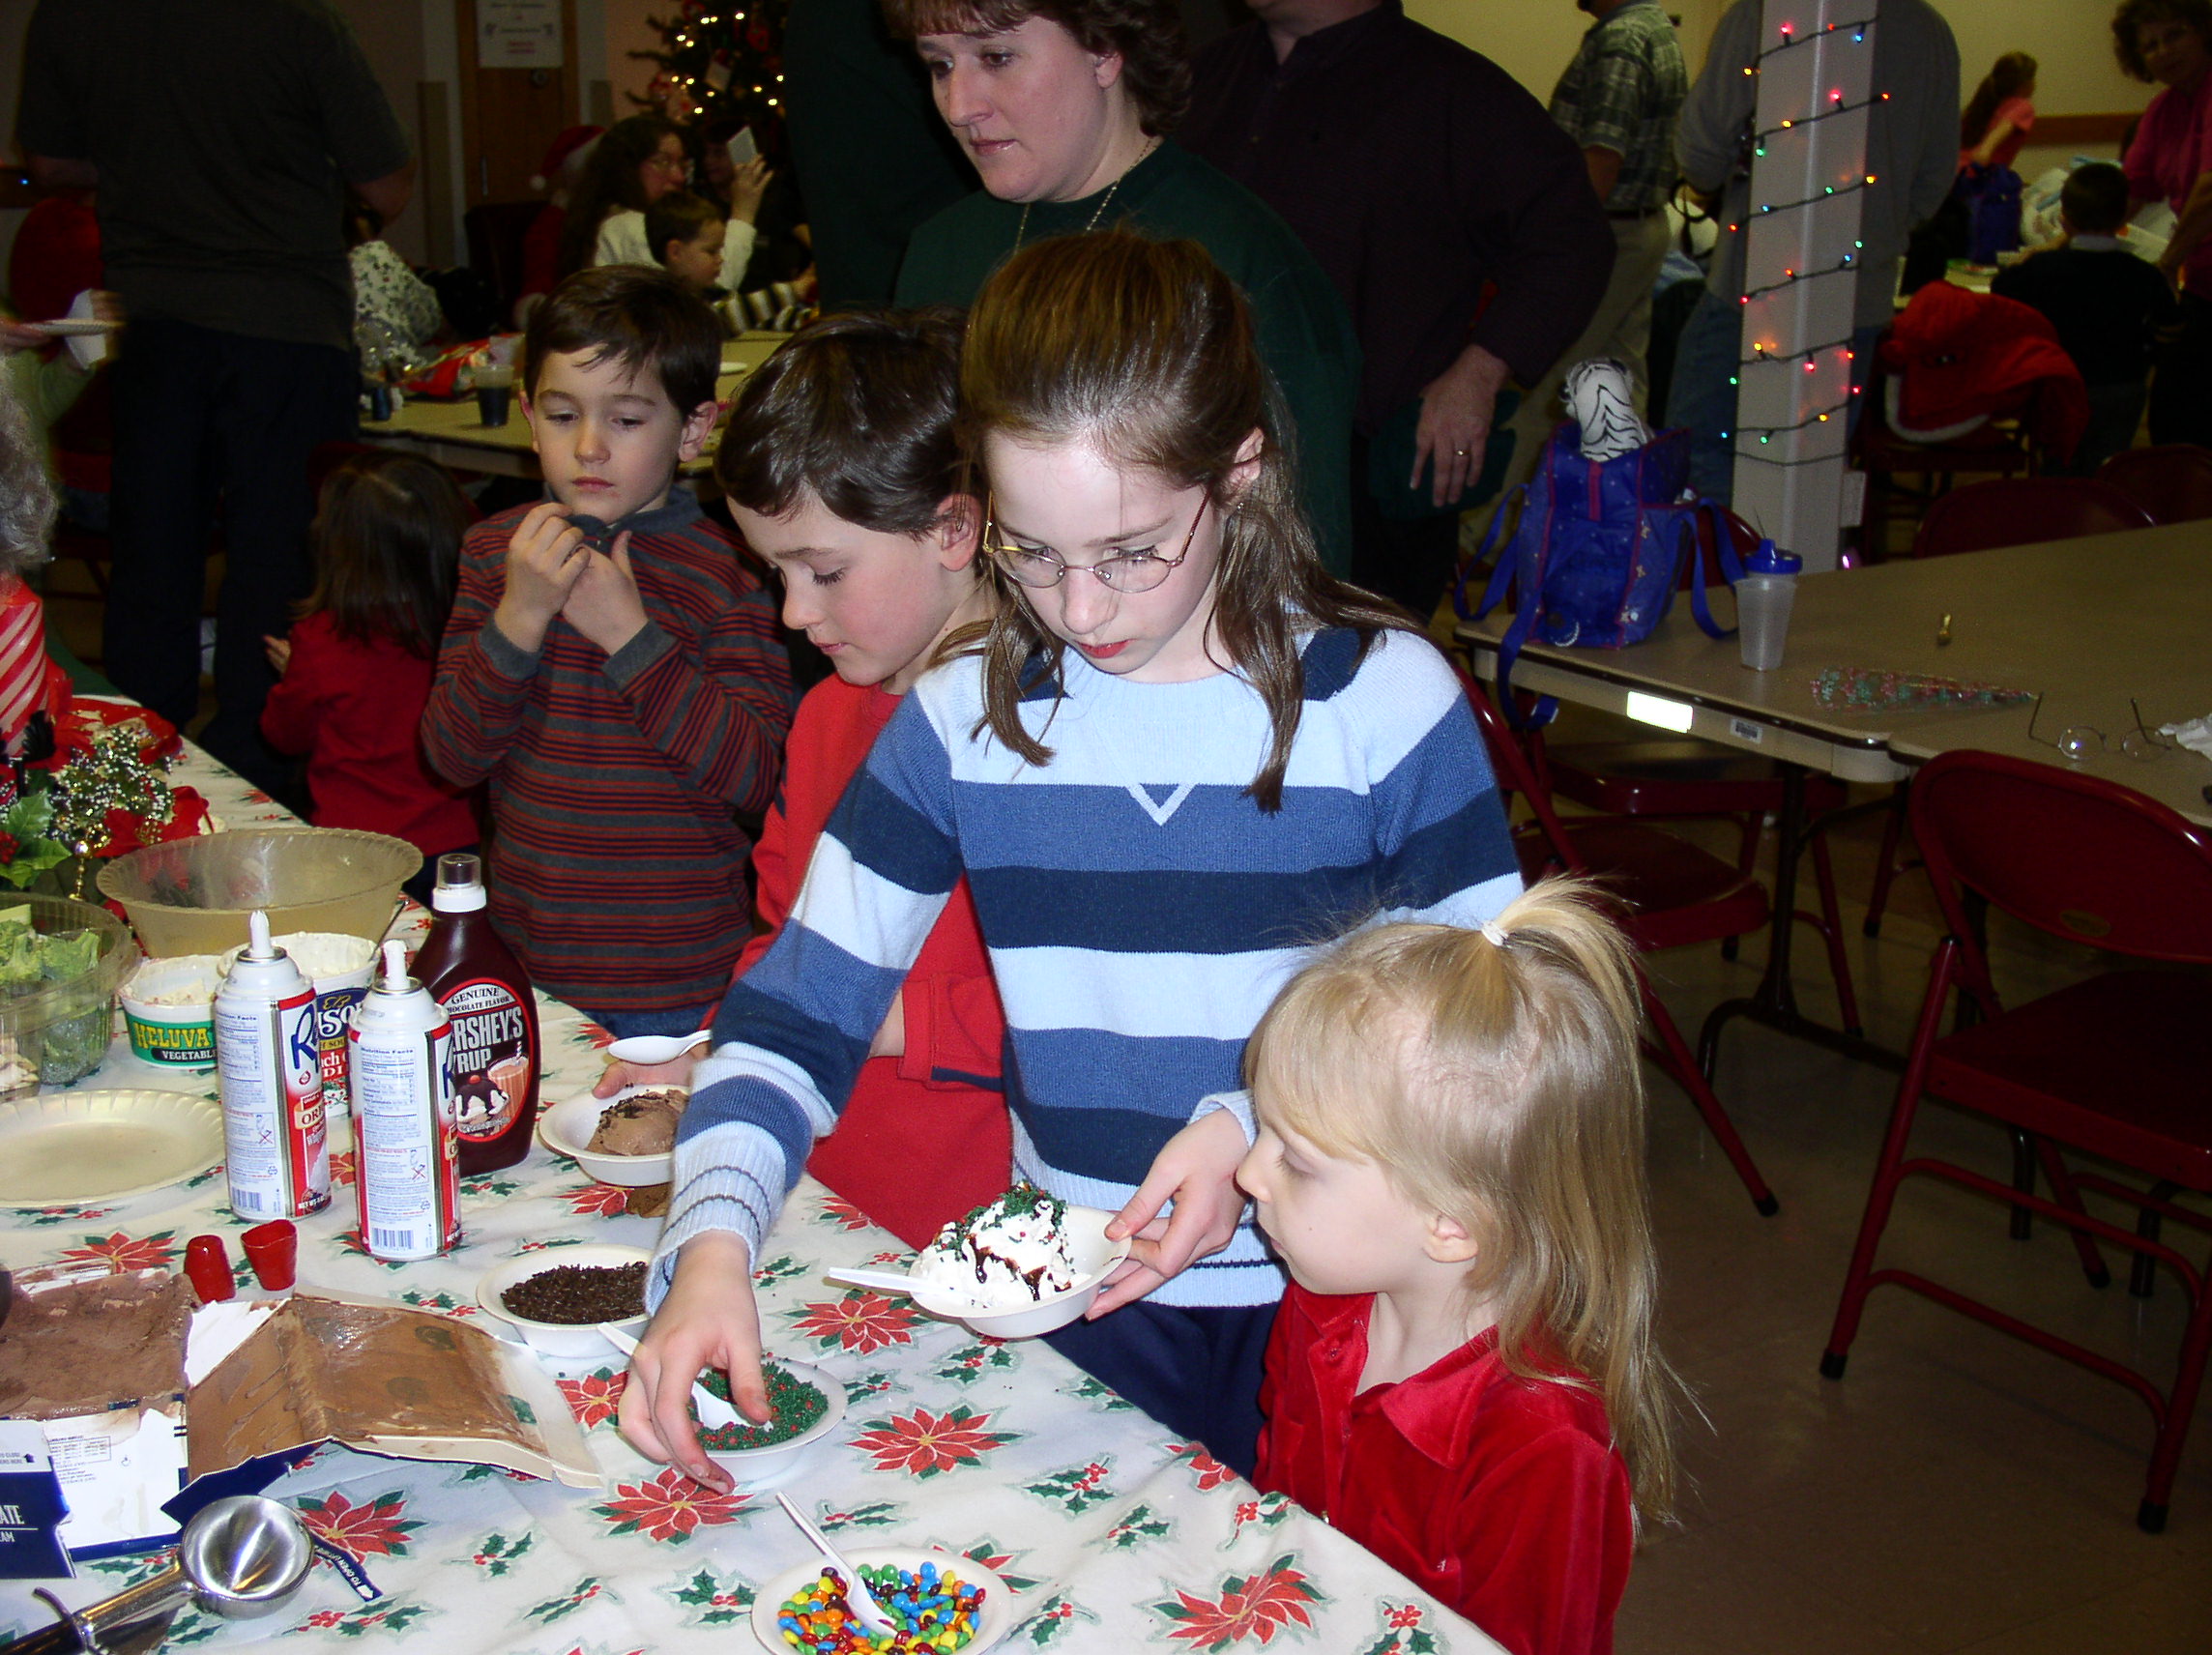 12-13-02  Other - Children's Christmas Party